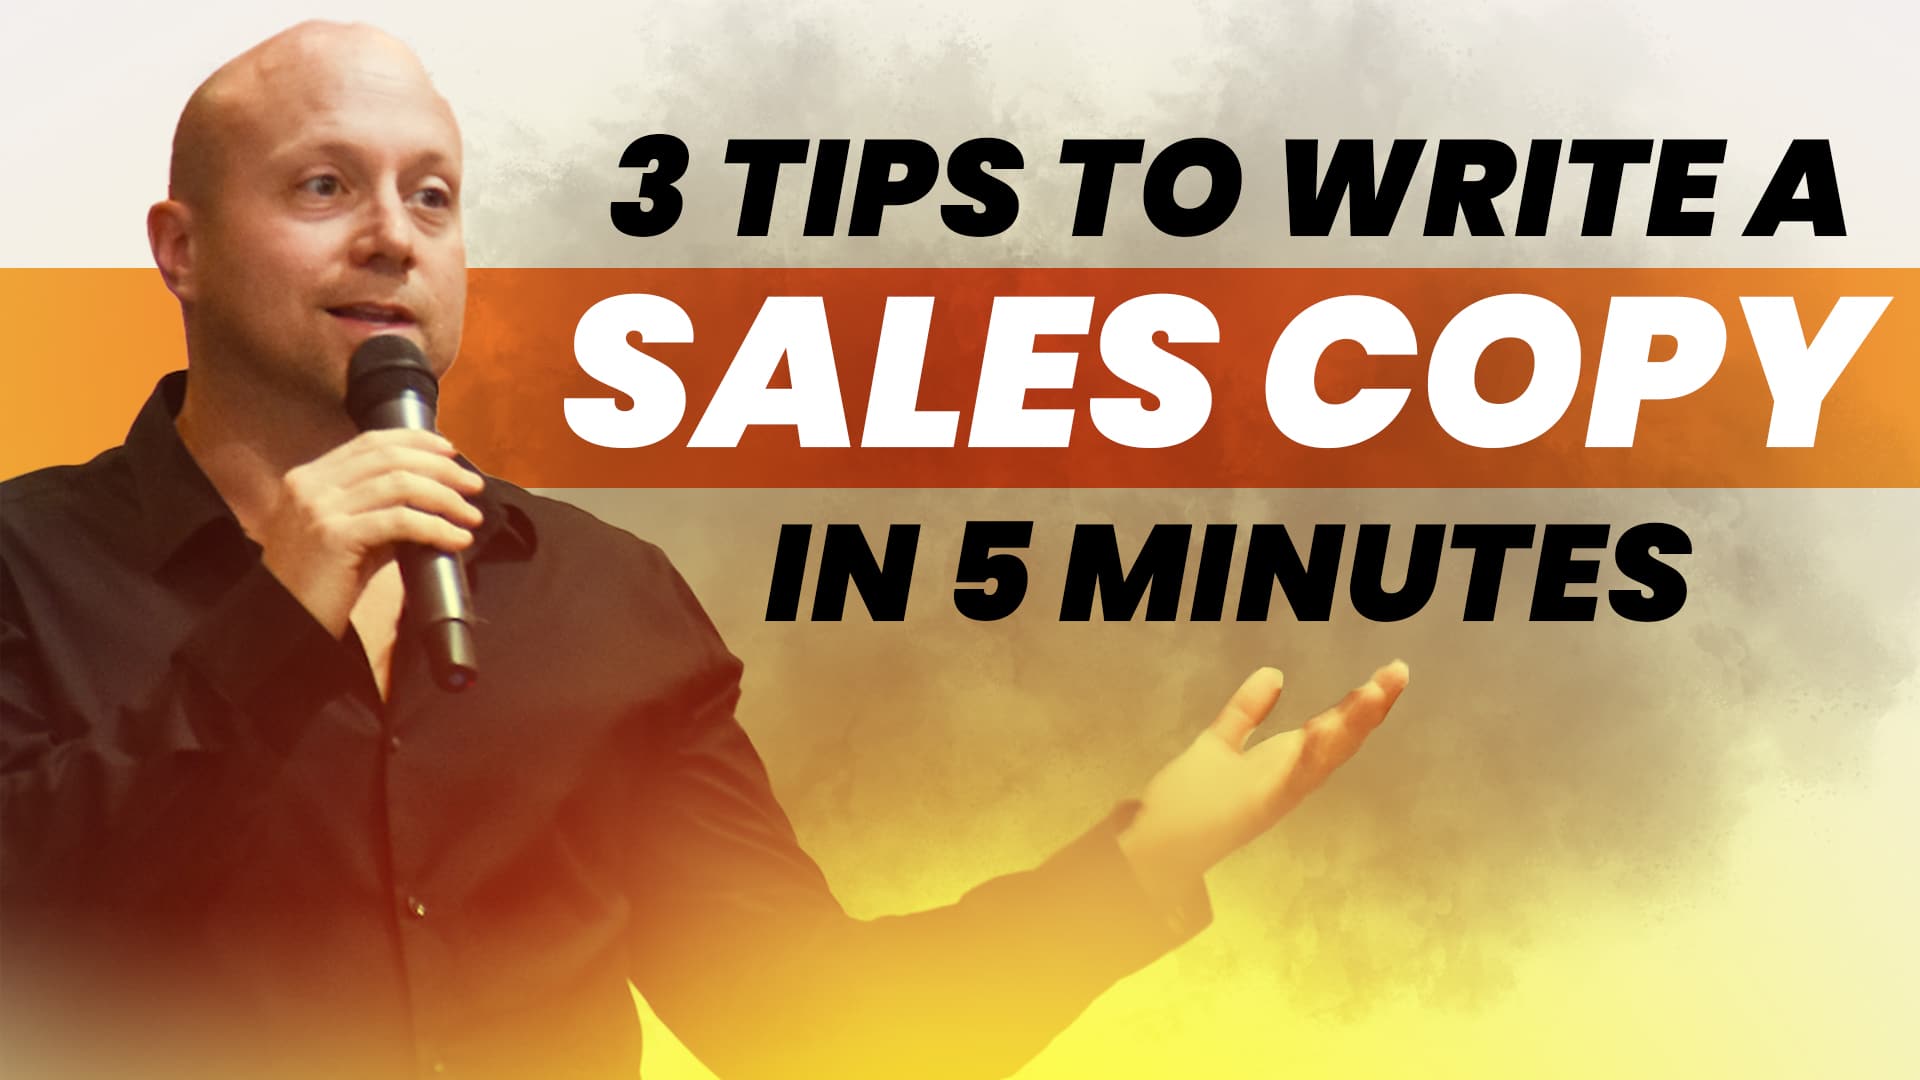 Episode 160: 3 tips to write a sales copy in 5 minutes